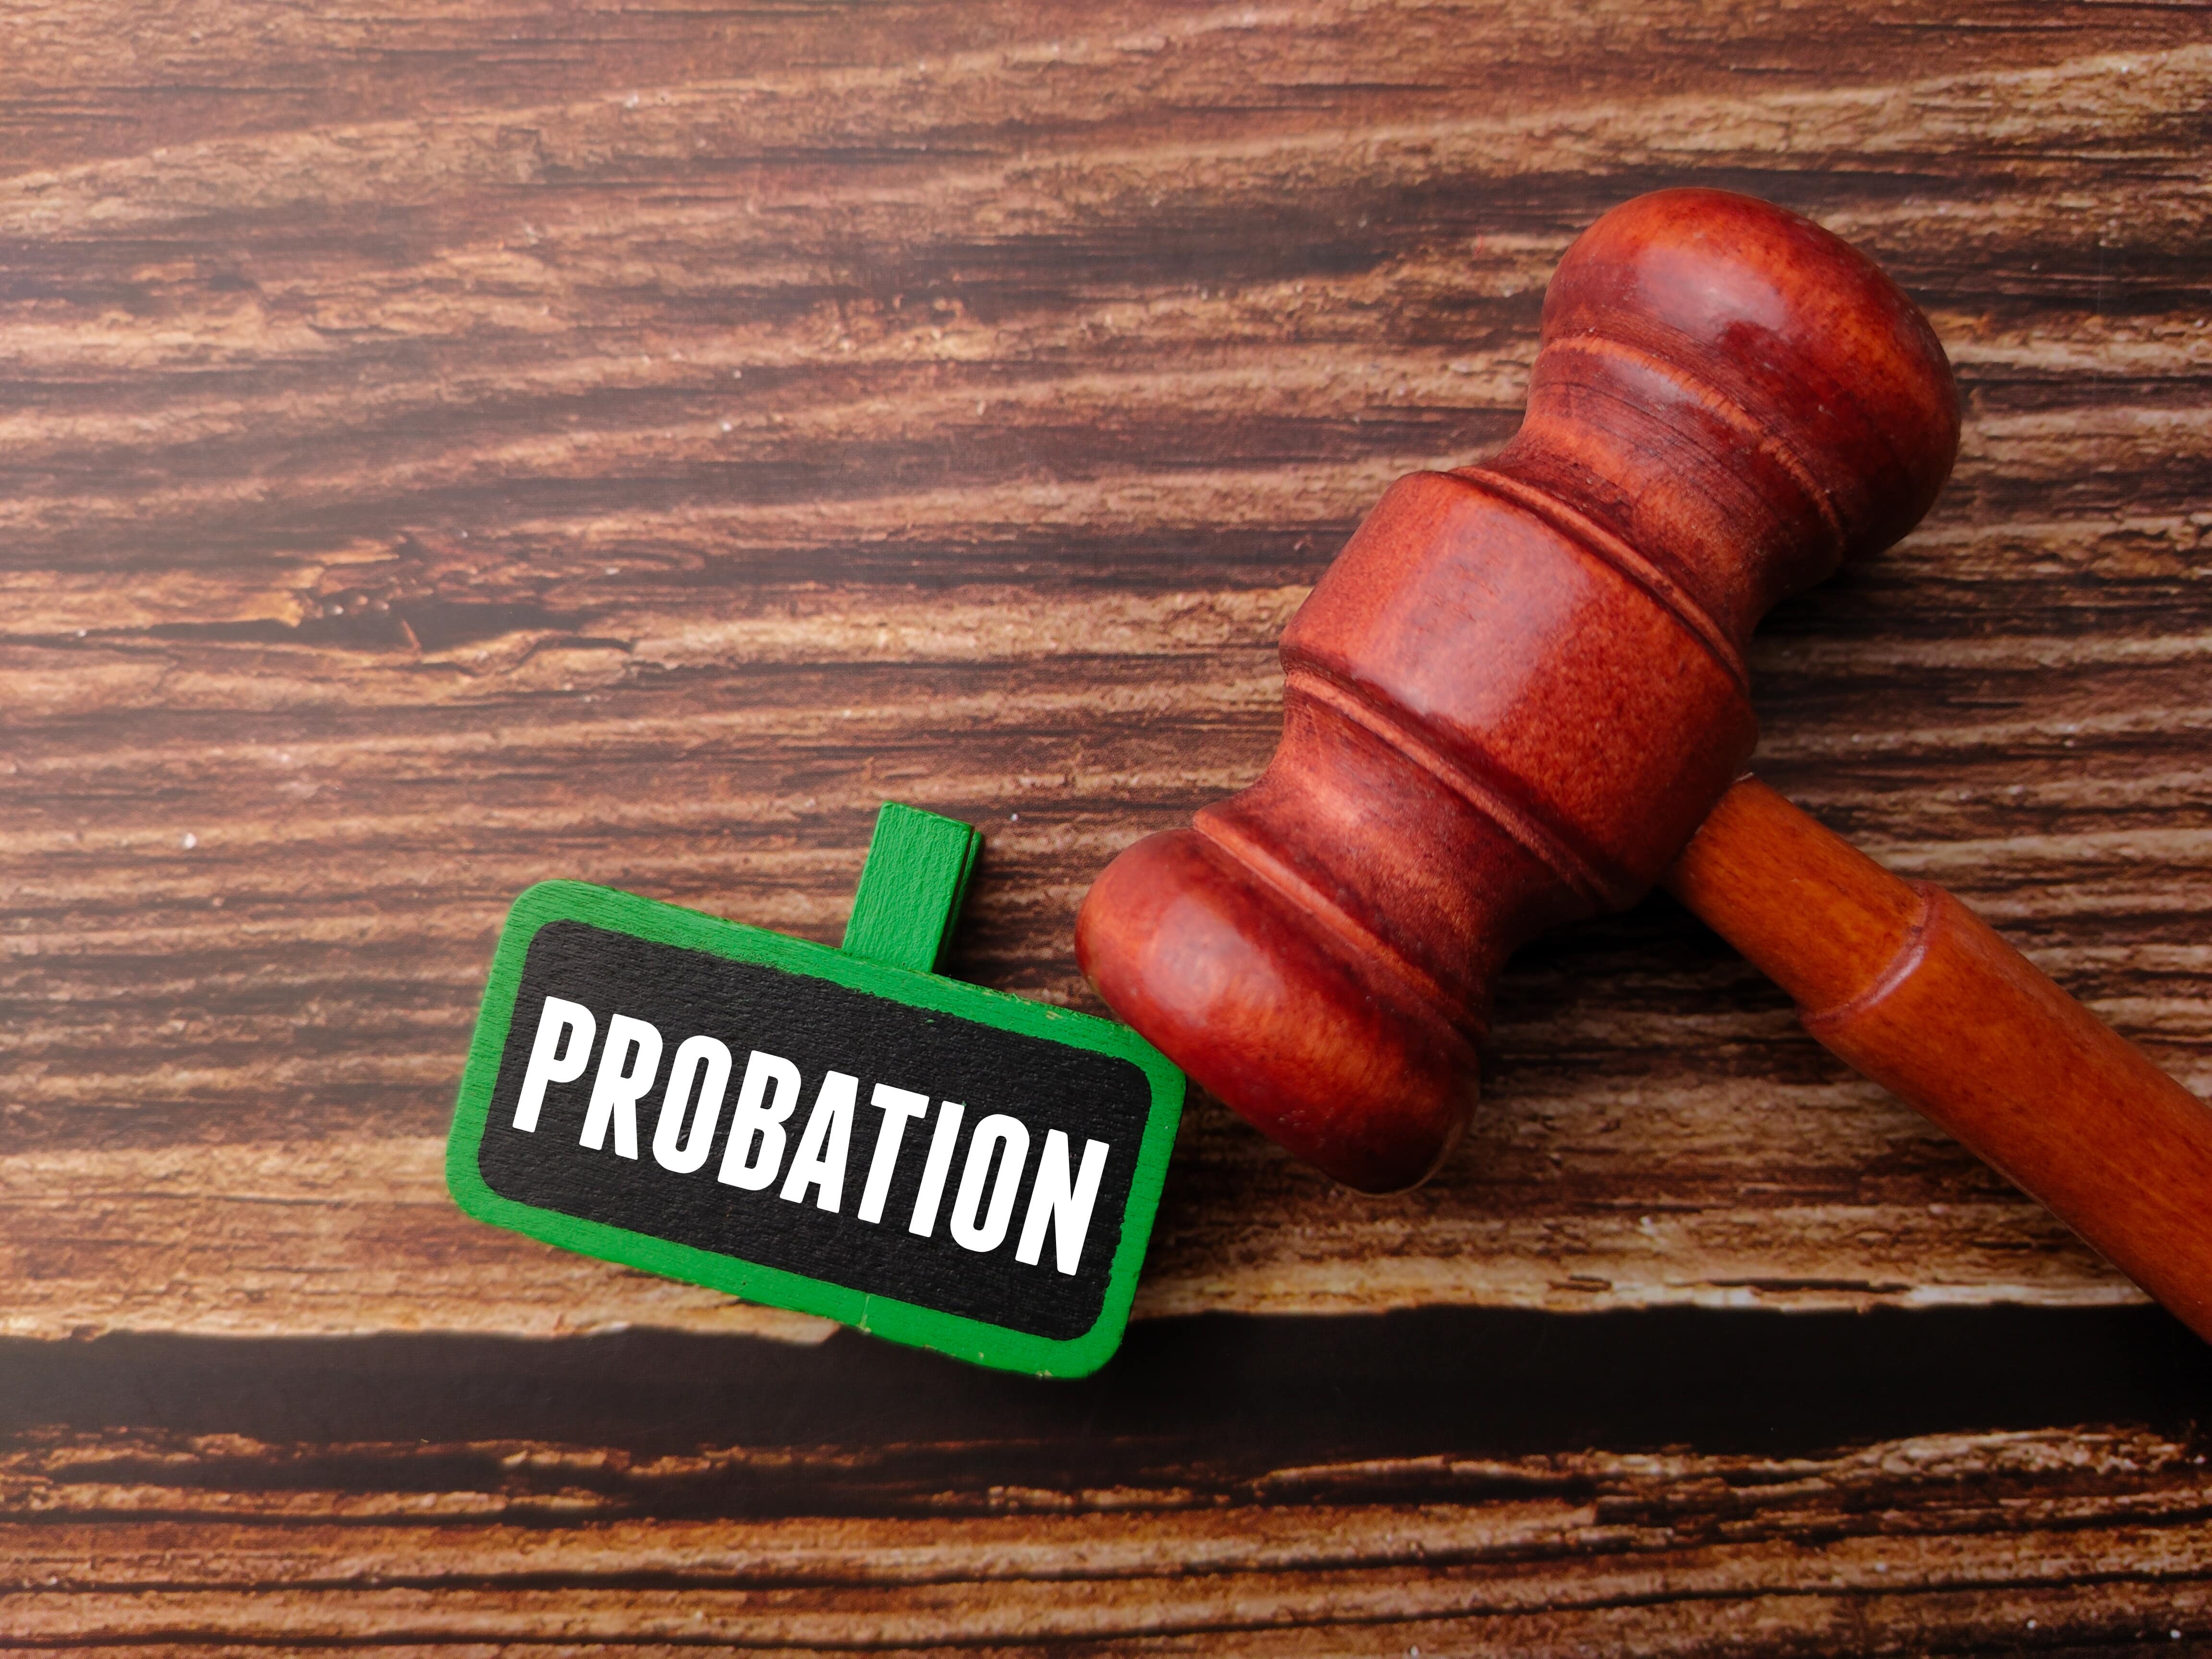 Day 11: Deciphering the Role of Probation in Arizona’s Criminal Justice System